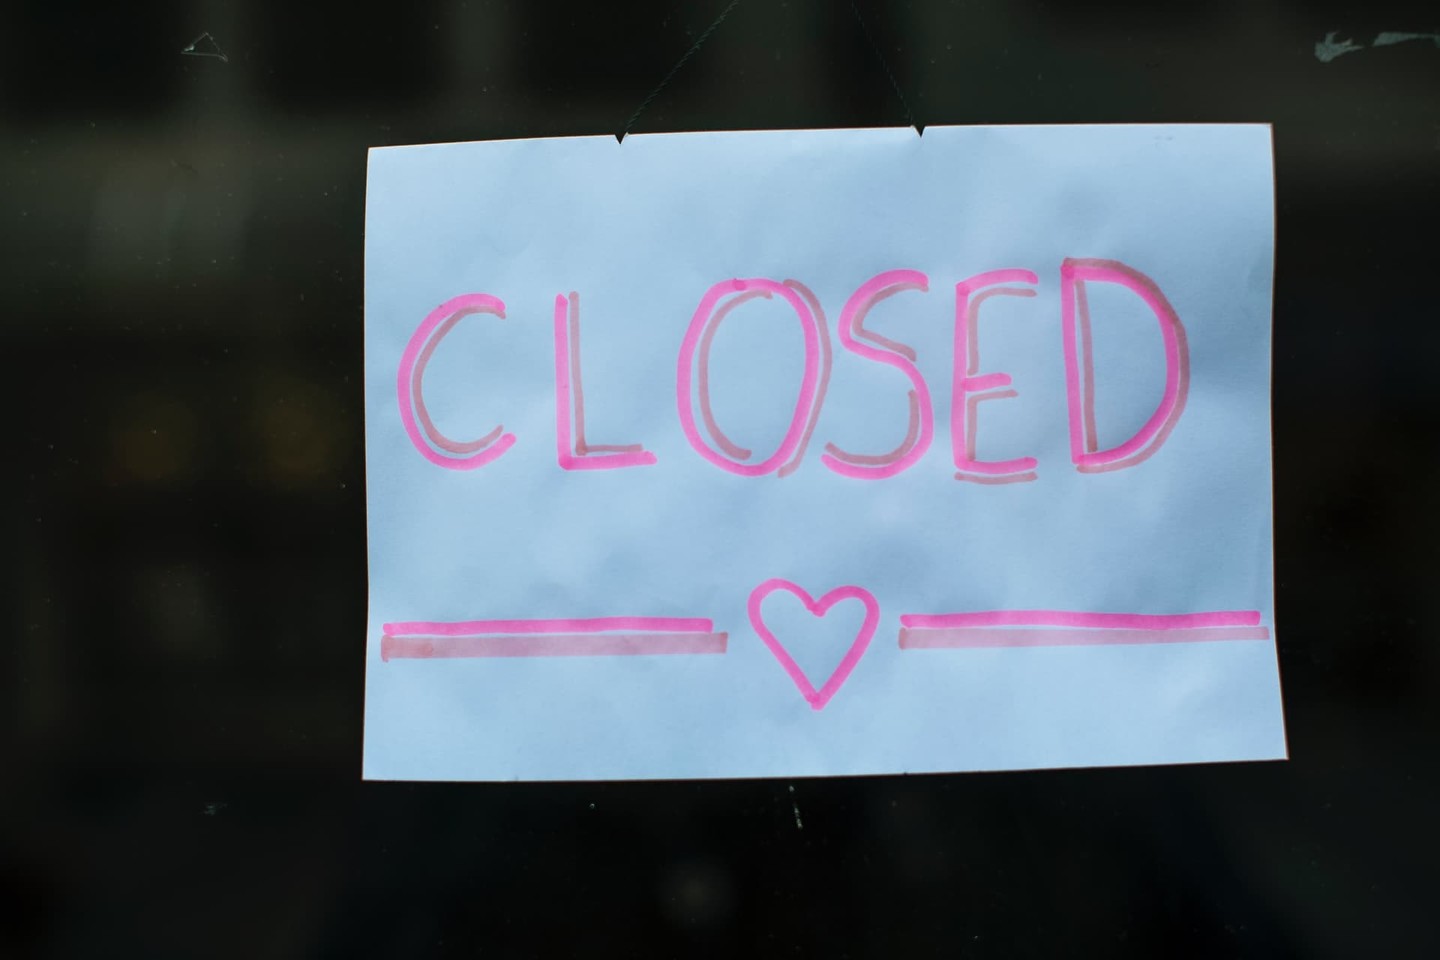 Closed sign in pink highlighter